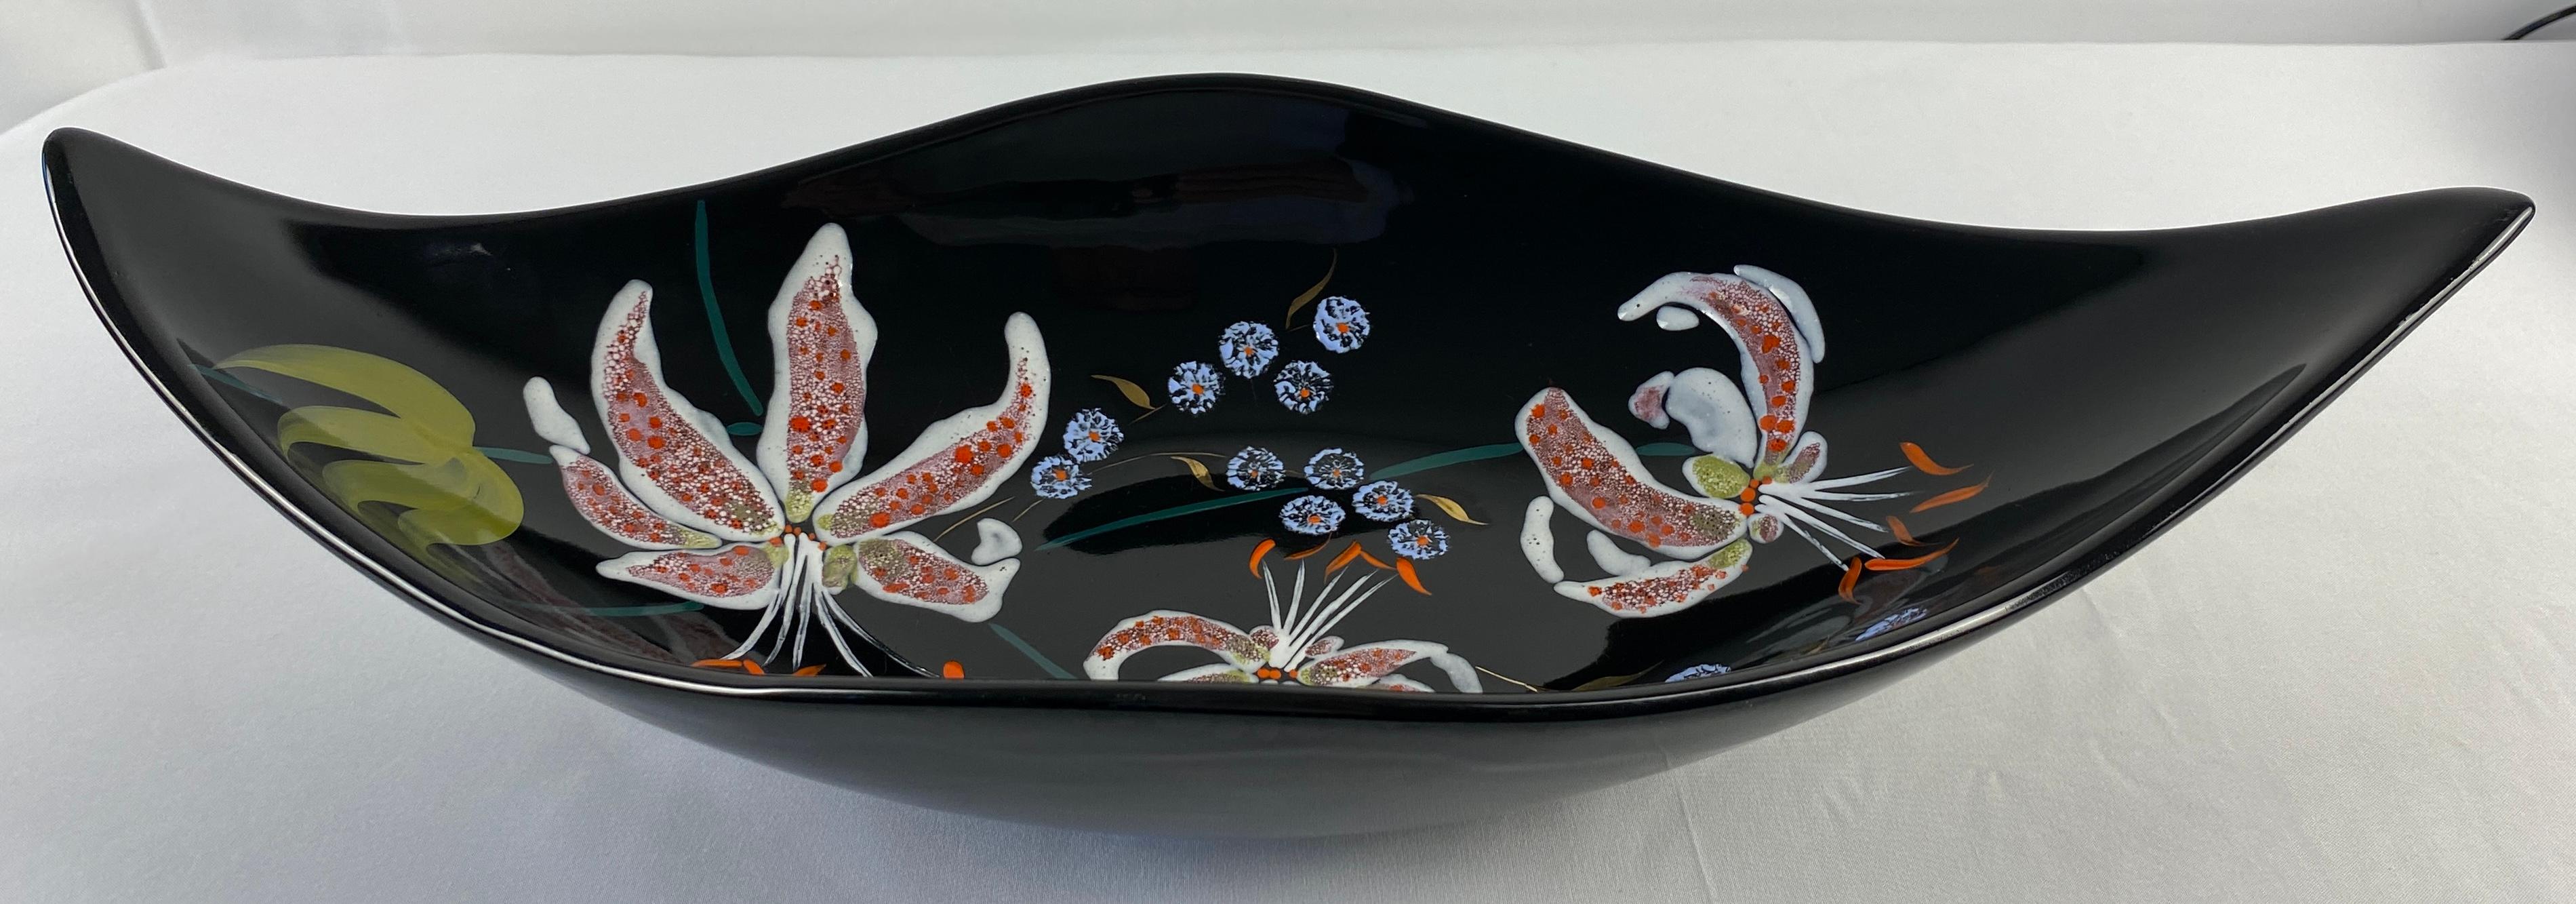 A stunning Mid-Century period faience bowl, made in France by the Emaux de Longwy art pottery workshop. Made and signed by the ceramic artist Lea Valenti. 

The decoration consists of multicolored blossoms with green leaves and blue stems on a